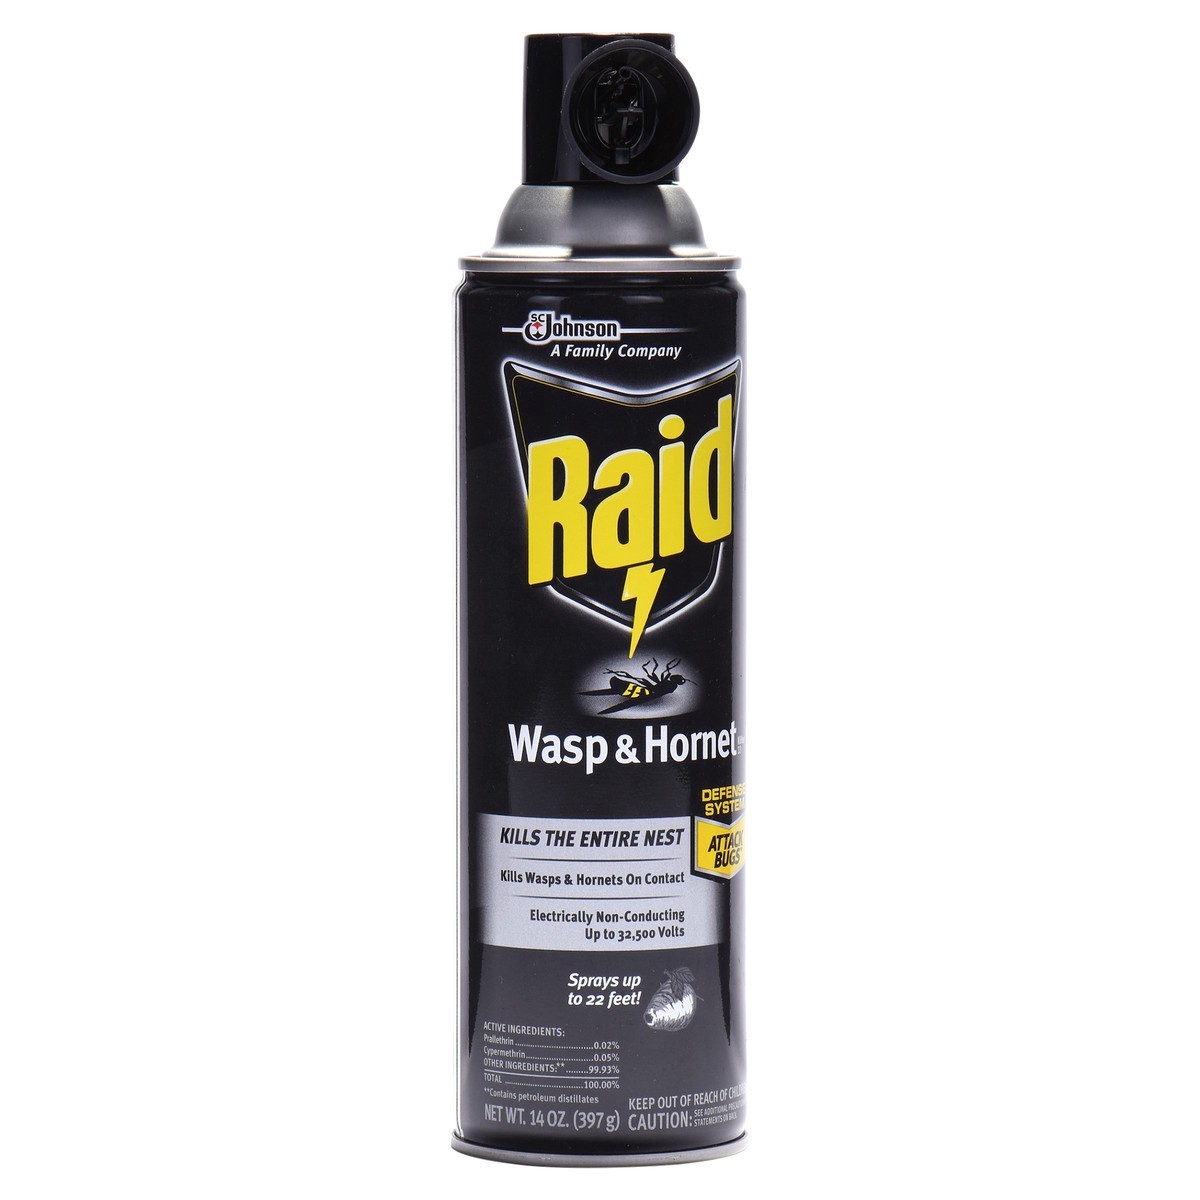 slide 2 of 5, Raid Wasp & Hornet Insect Killer 33, Insect Spray for Stinging Bugs & Their Nests, 14 oz, 14 oz